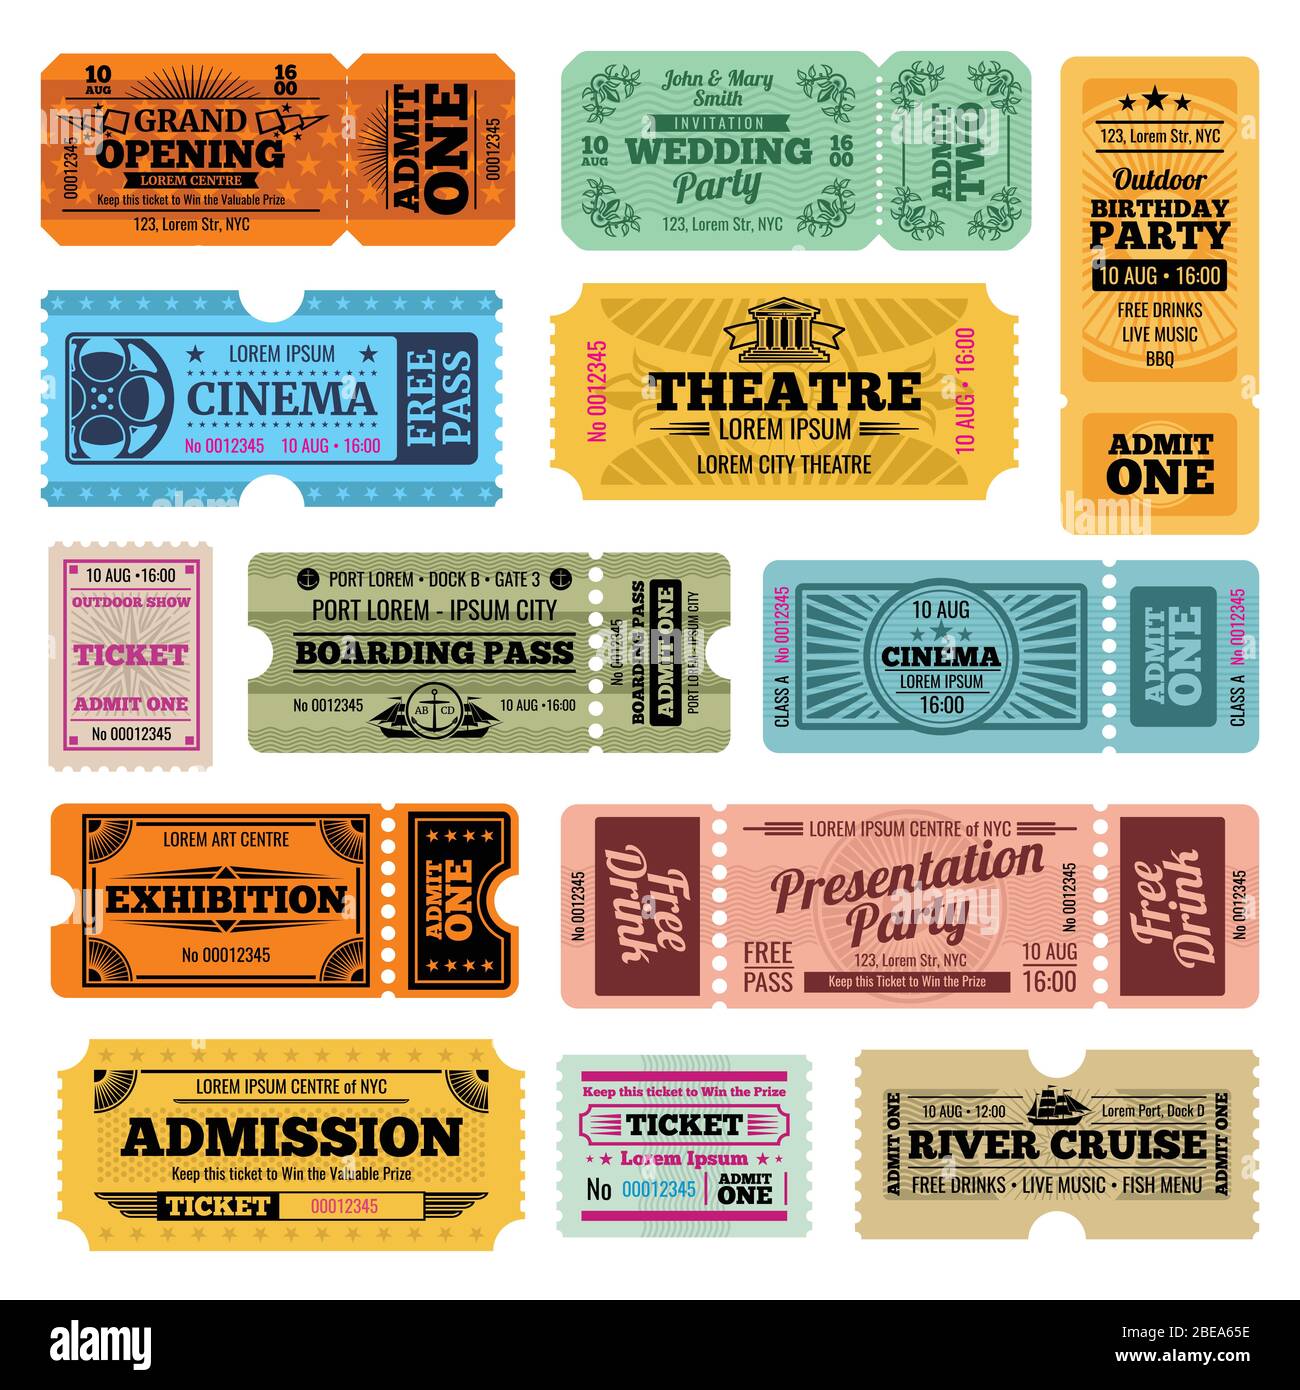 Circus, party and cinema vector vintage admission tickets templates. Collection of retro ticket to cinema, theater and river cruise illustration Stock Vector